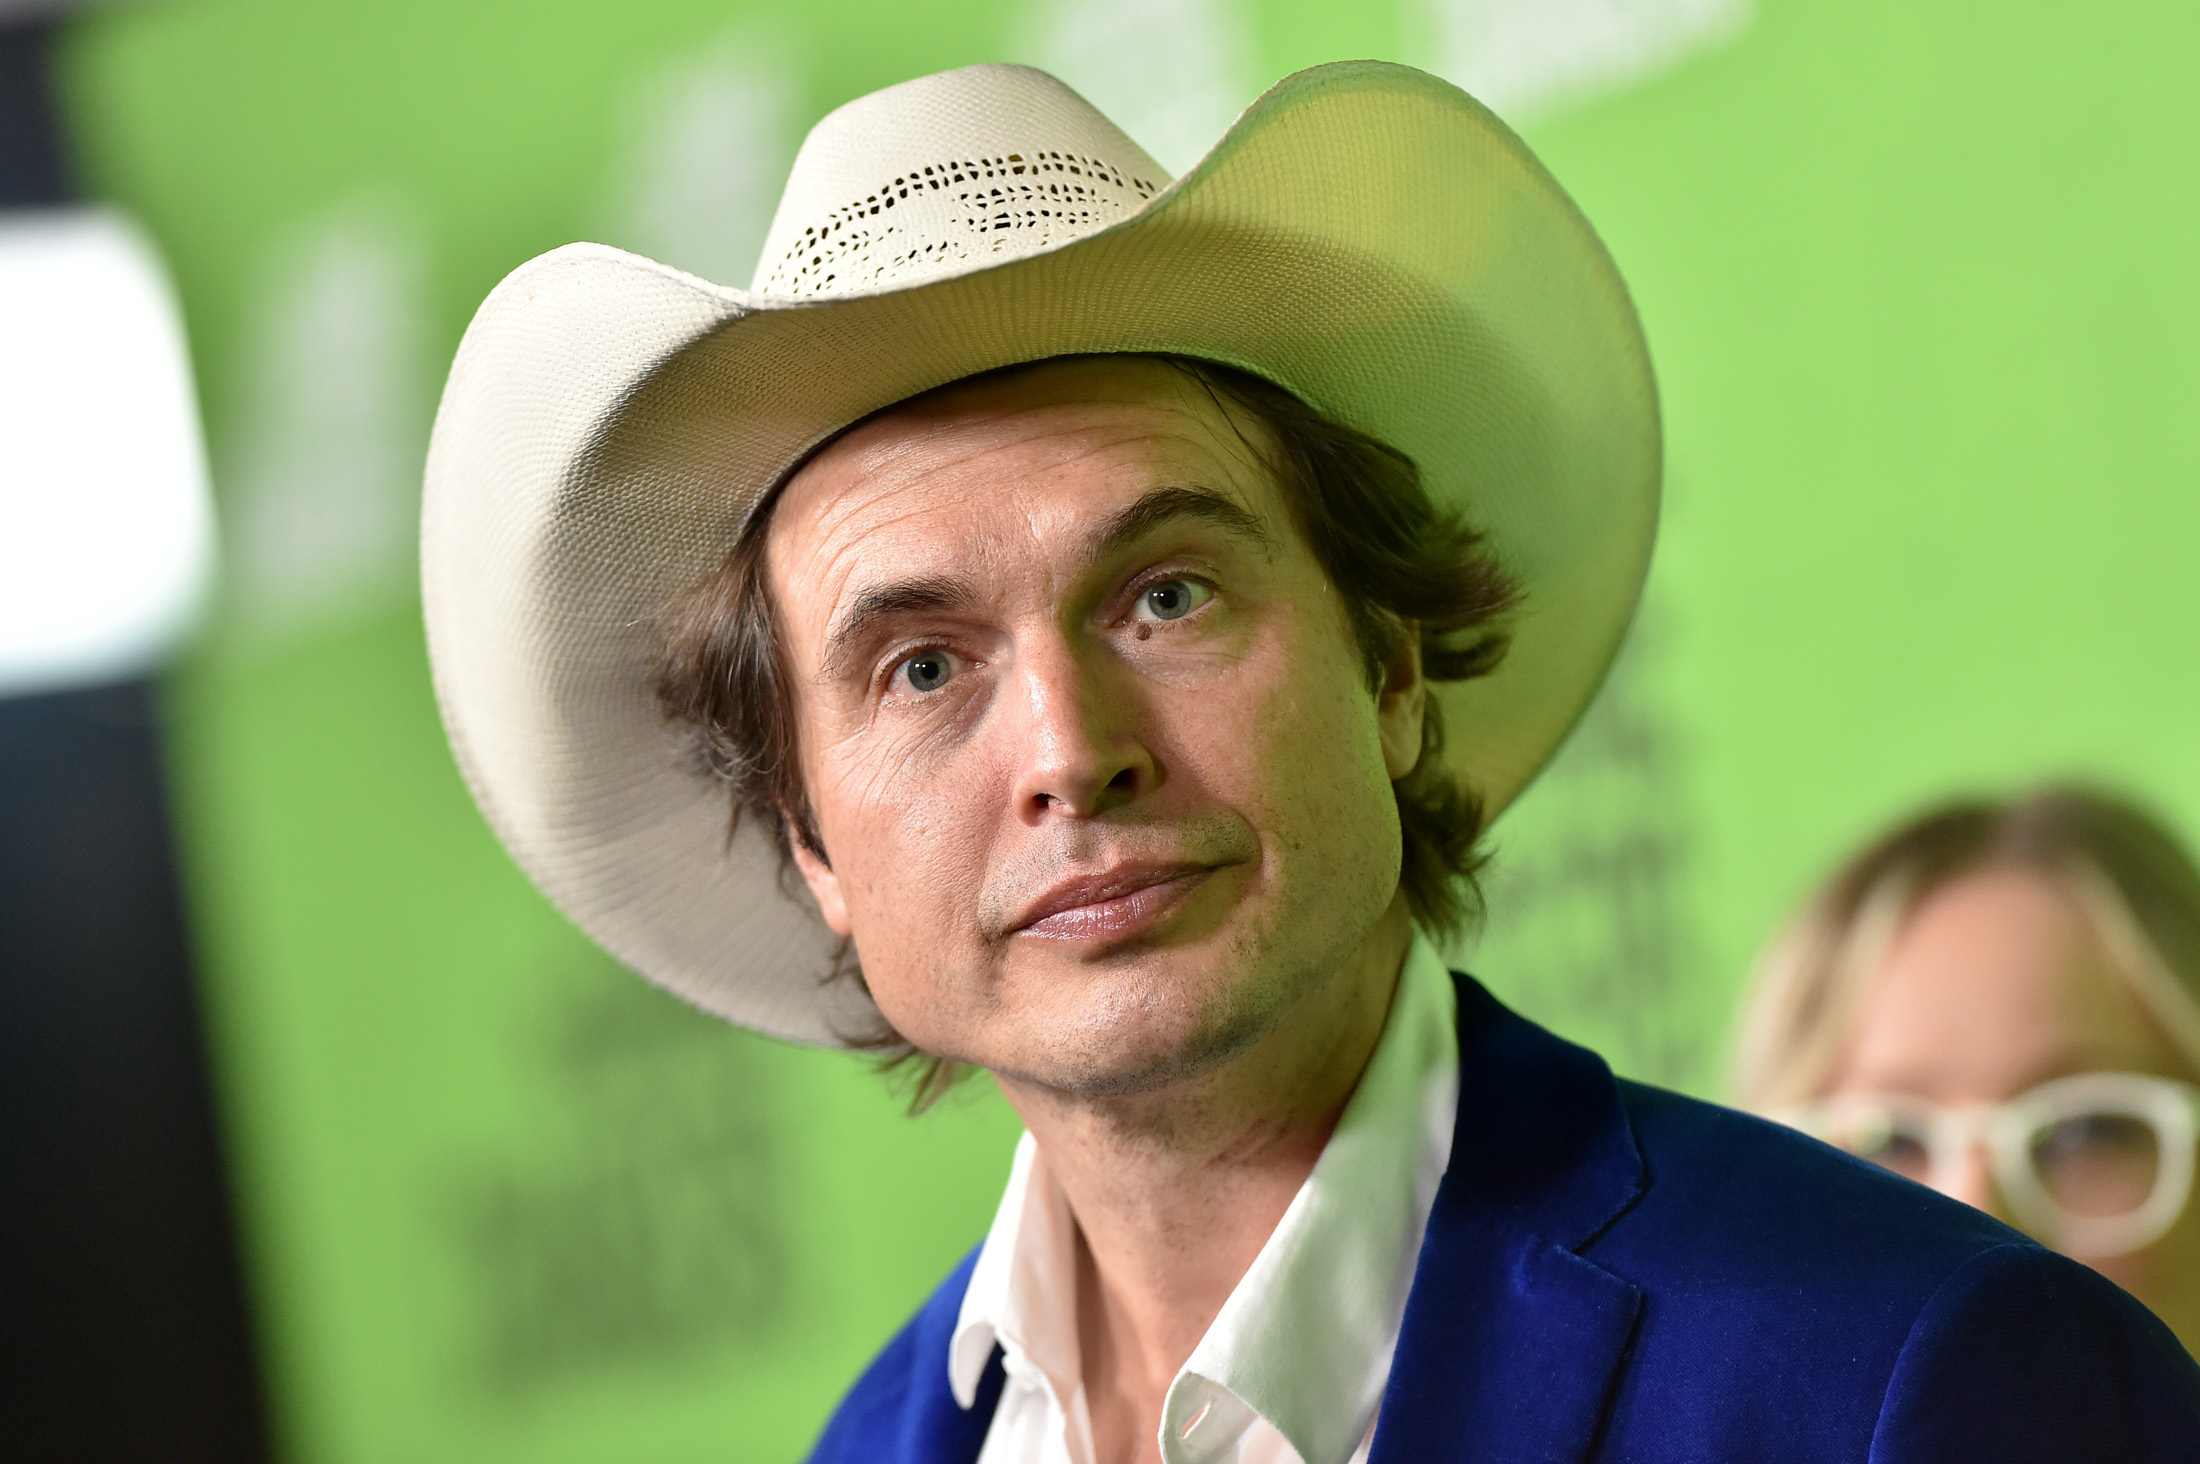 Kimbal Musk Started the Big Green DAO to Try Disrupting ...